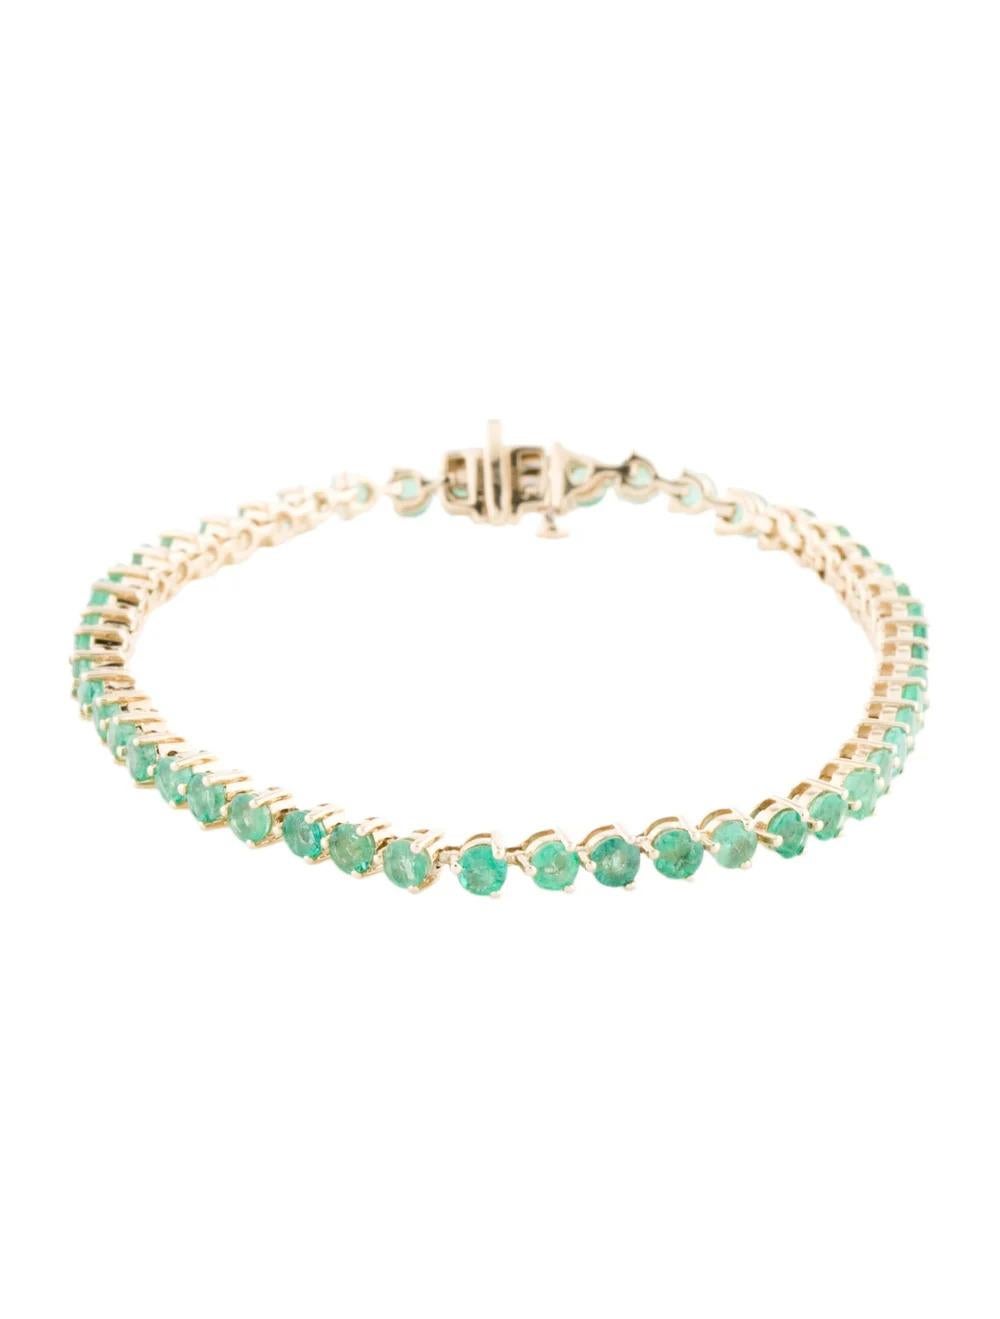 Elevate your style with this exquisite 14K Yellow Gold Emerald Link Bracelet, featuring a stunning 3.87 Carat Round Faceted Emerald, radiating timeless elegance and sophistication.

Specifications:

* Metal Type: 14K Yellow Gold
* Gemstone:
*